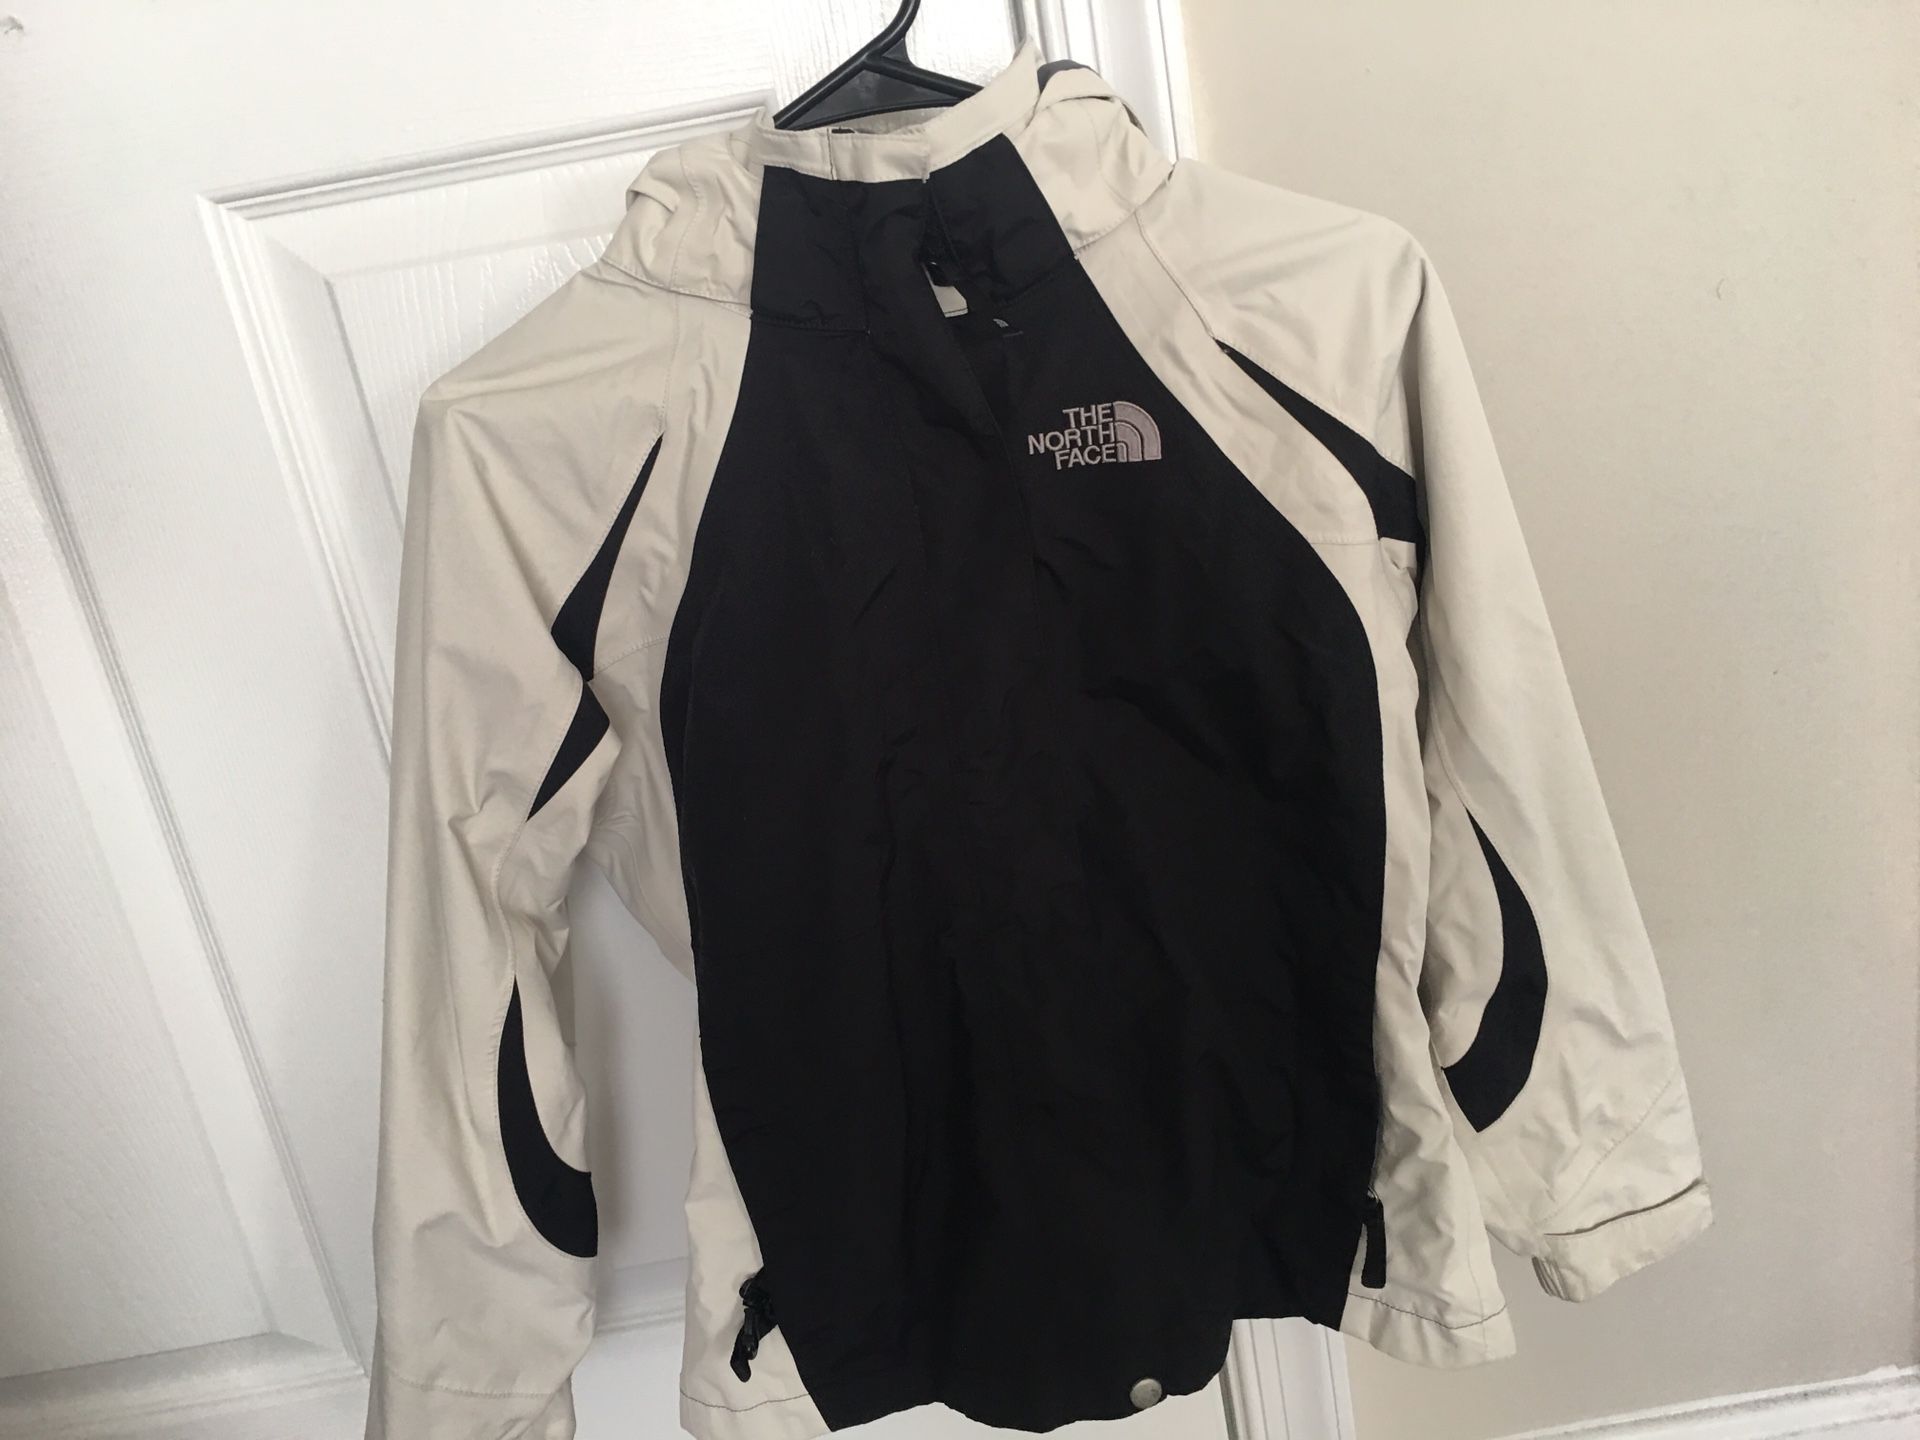 North Face (water proof) rain jacket $10